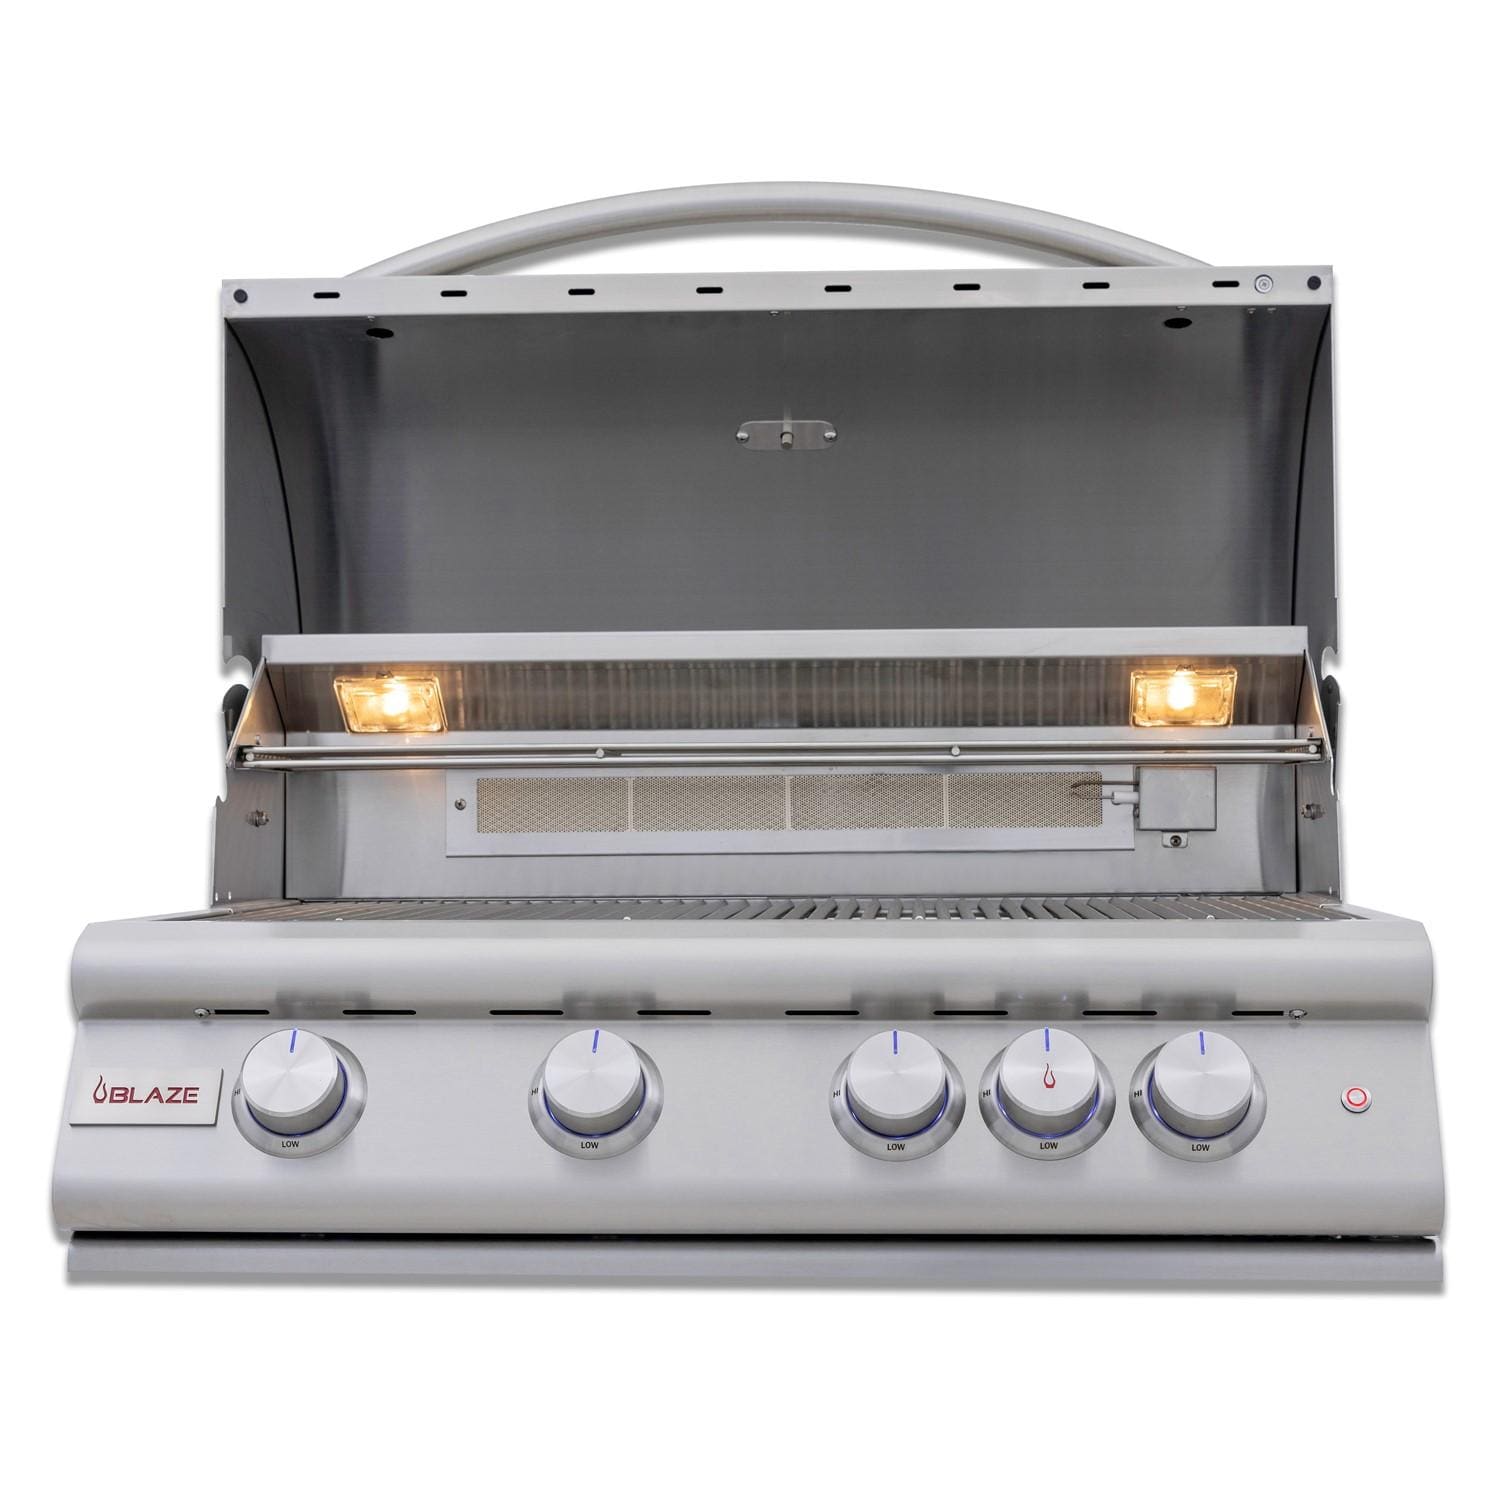 Open hood of the Blaze Grills Premium LTE+ 32-Inch 4-Burner Gas Grill showing the grilling area and rear infrared burner.